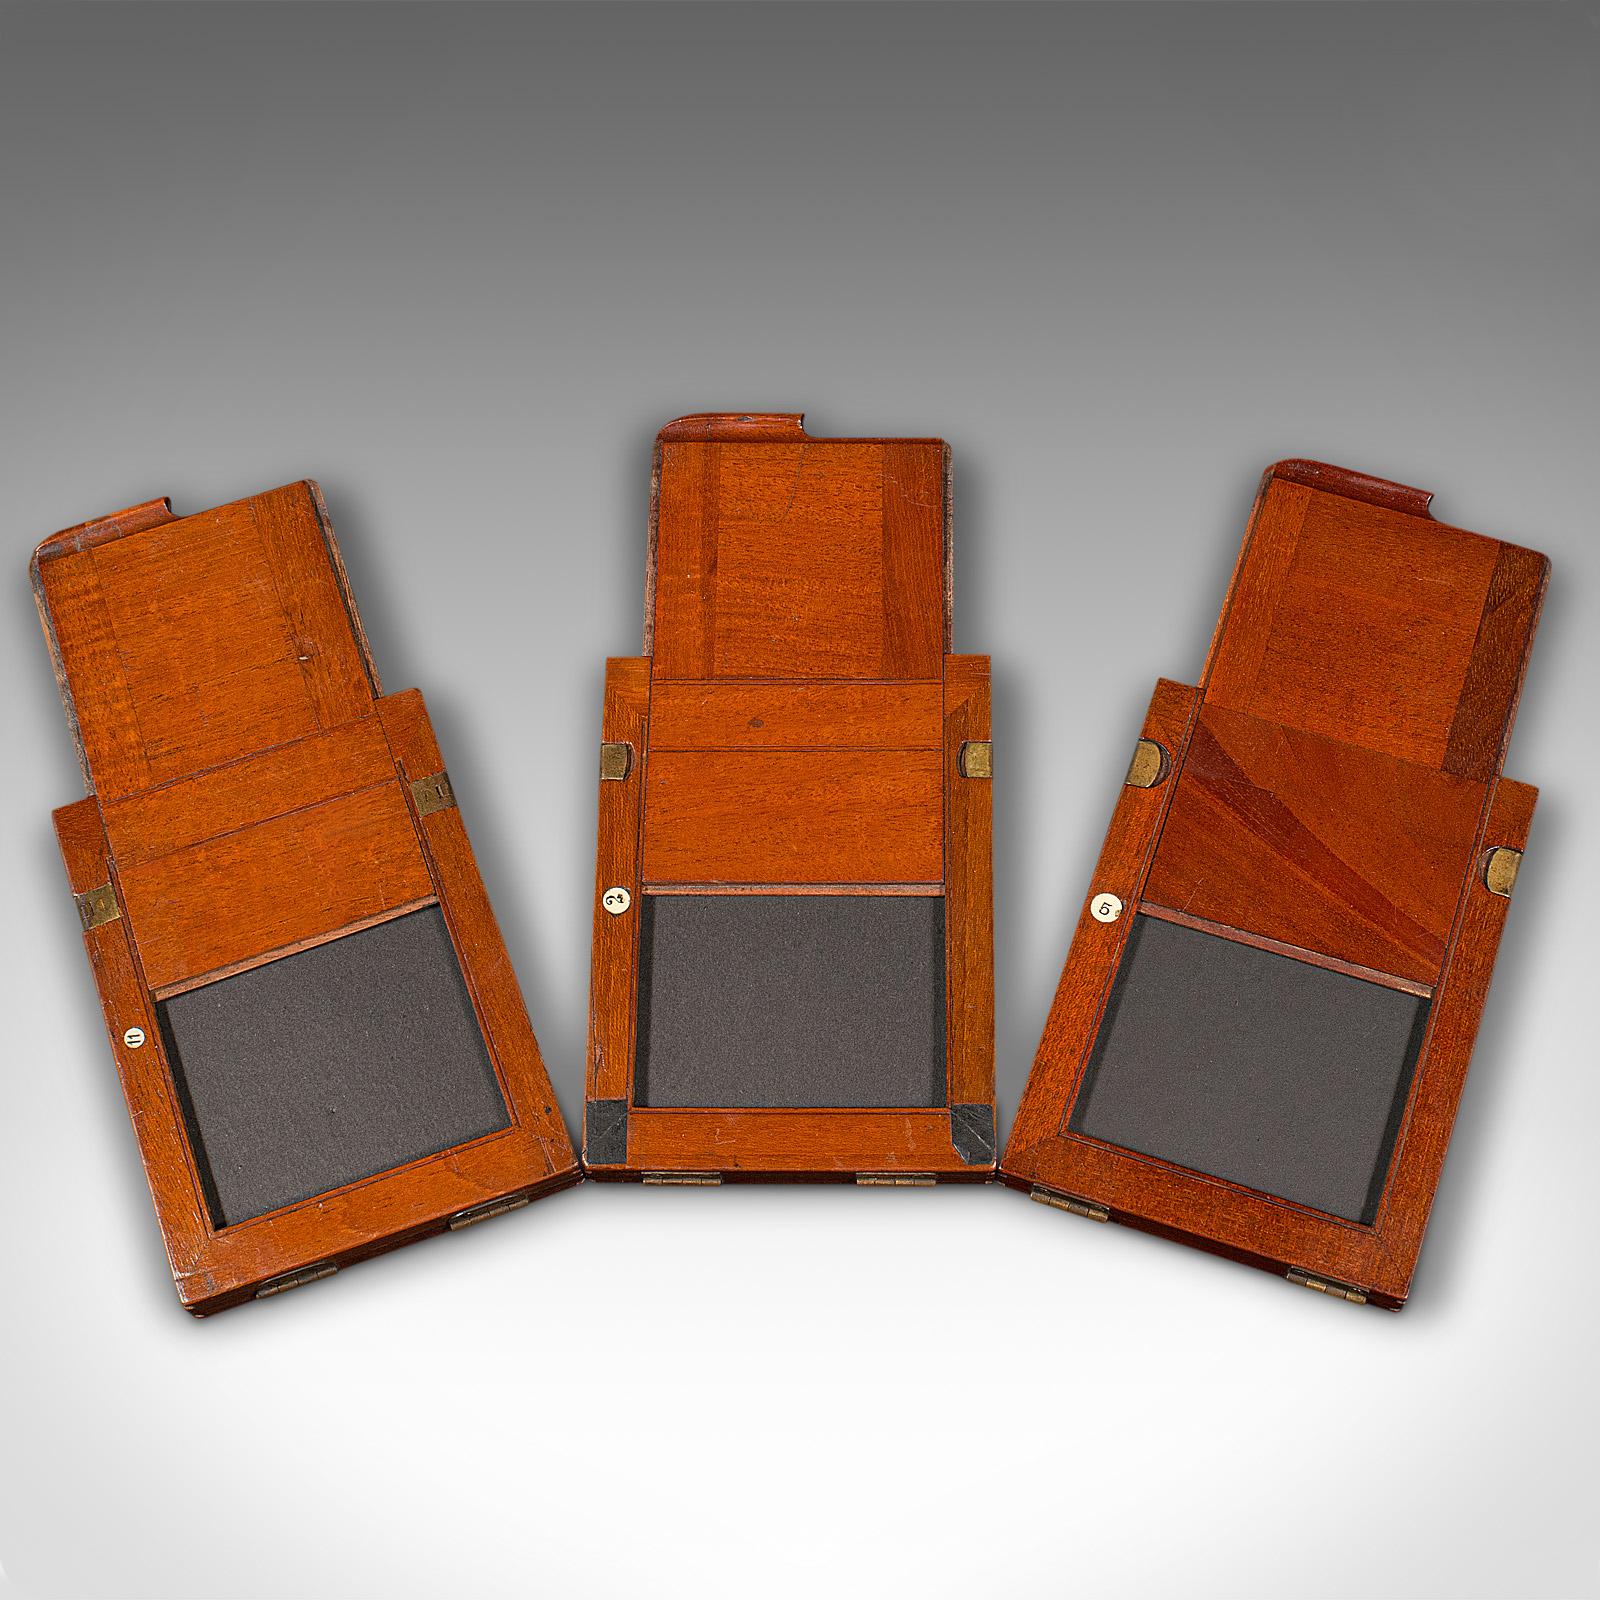 This is a set of 3 antique quarter plate film holders. An English, mahogany double dark photographic slide, dating to the late Victorian period, circa 1900.

A fascinating set of early photographic slides
Displaying a desirable aged patina and in